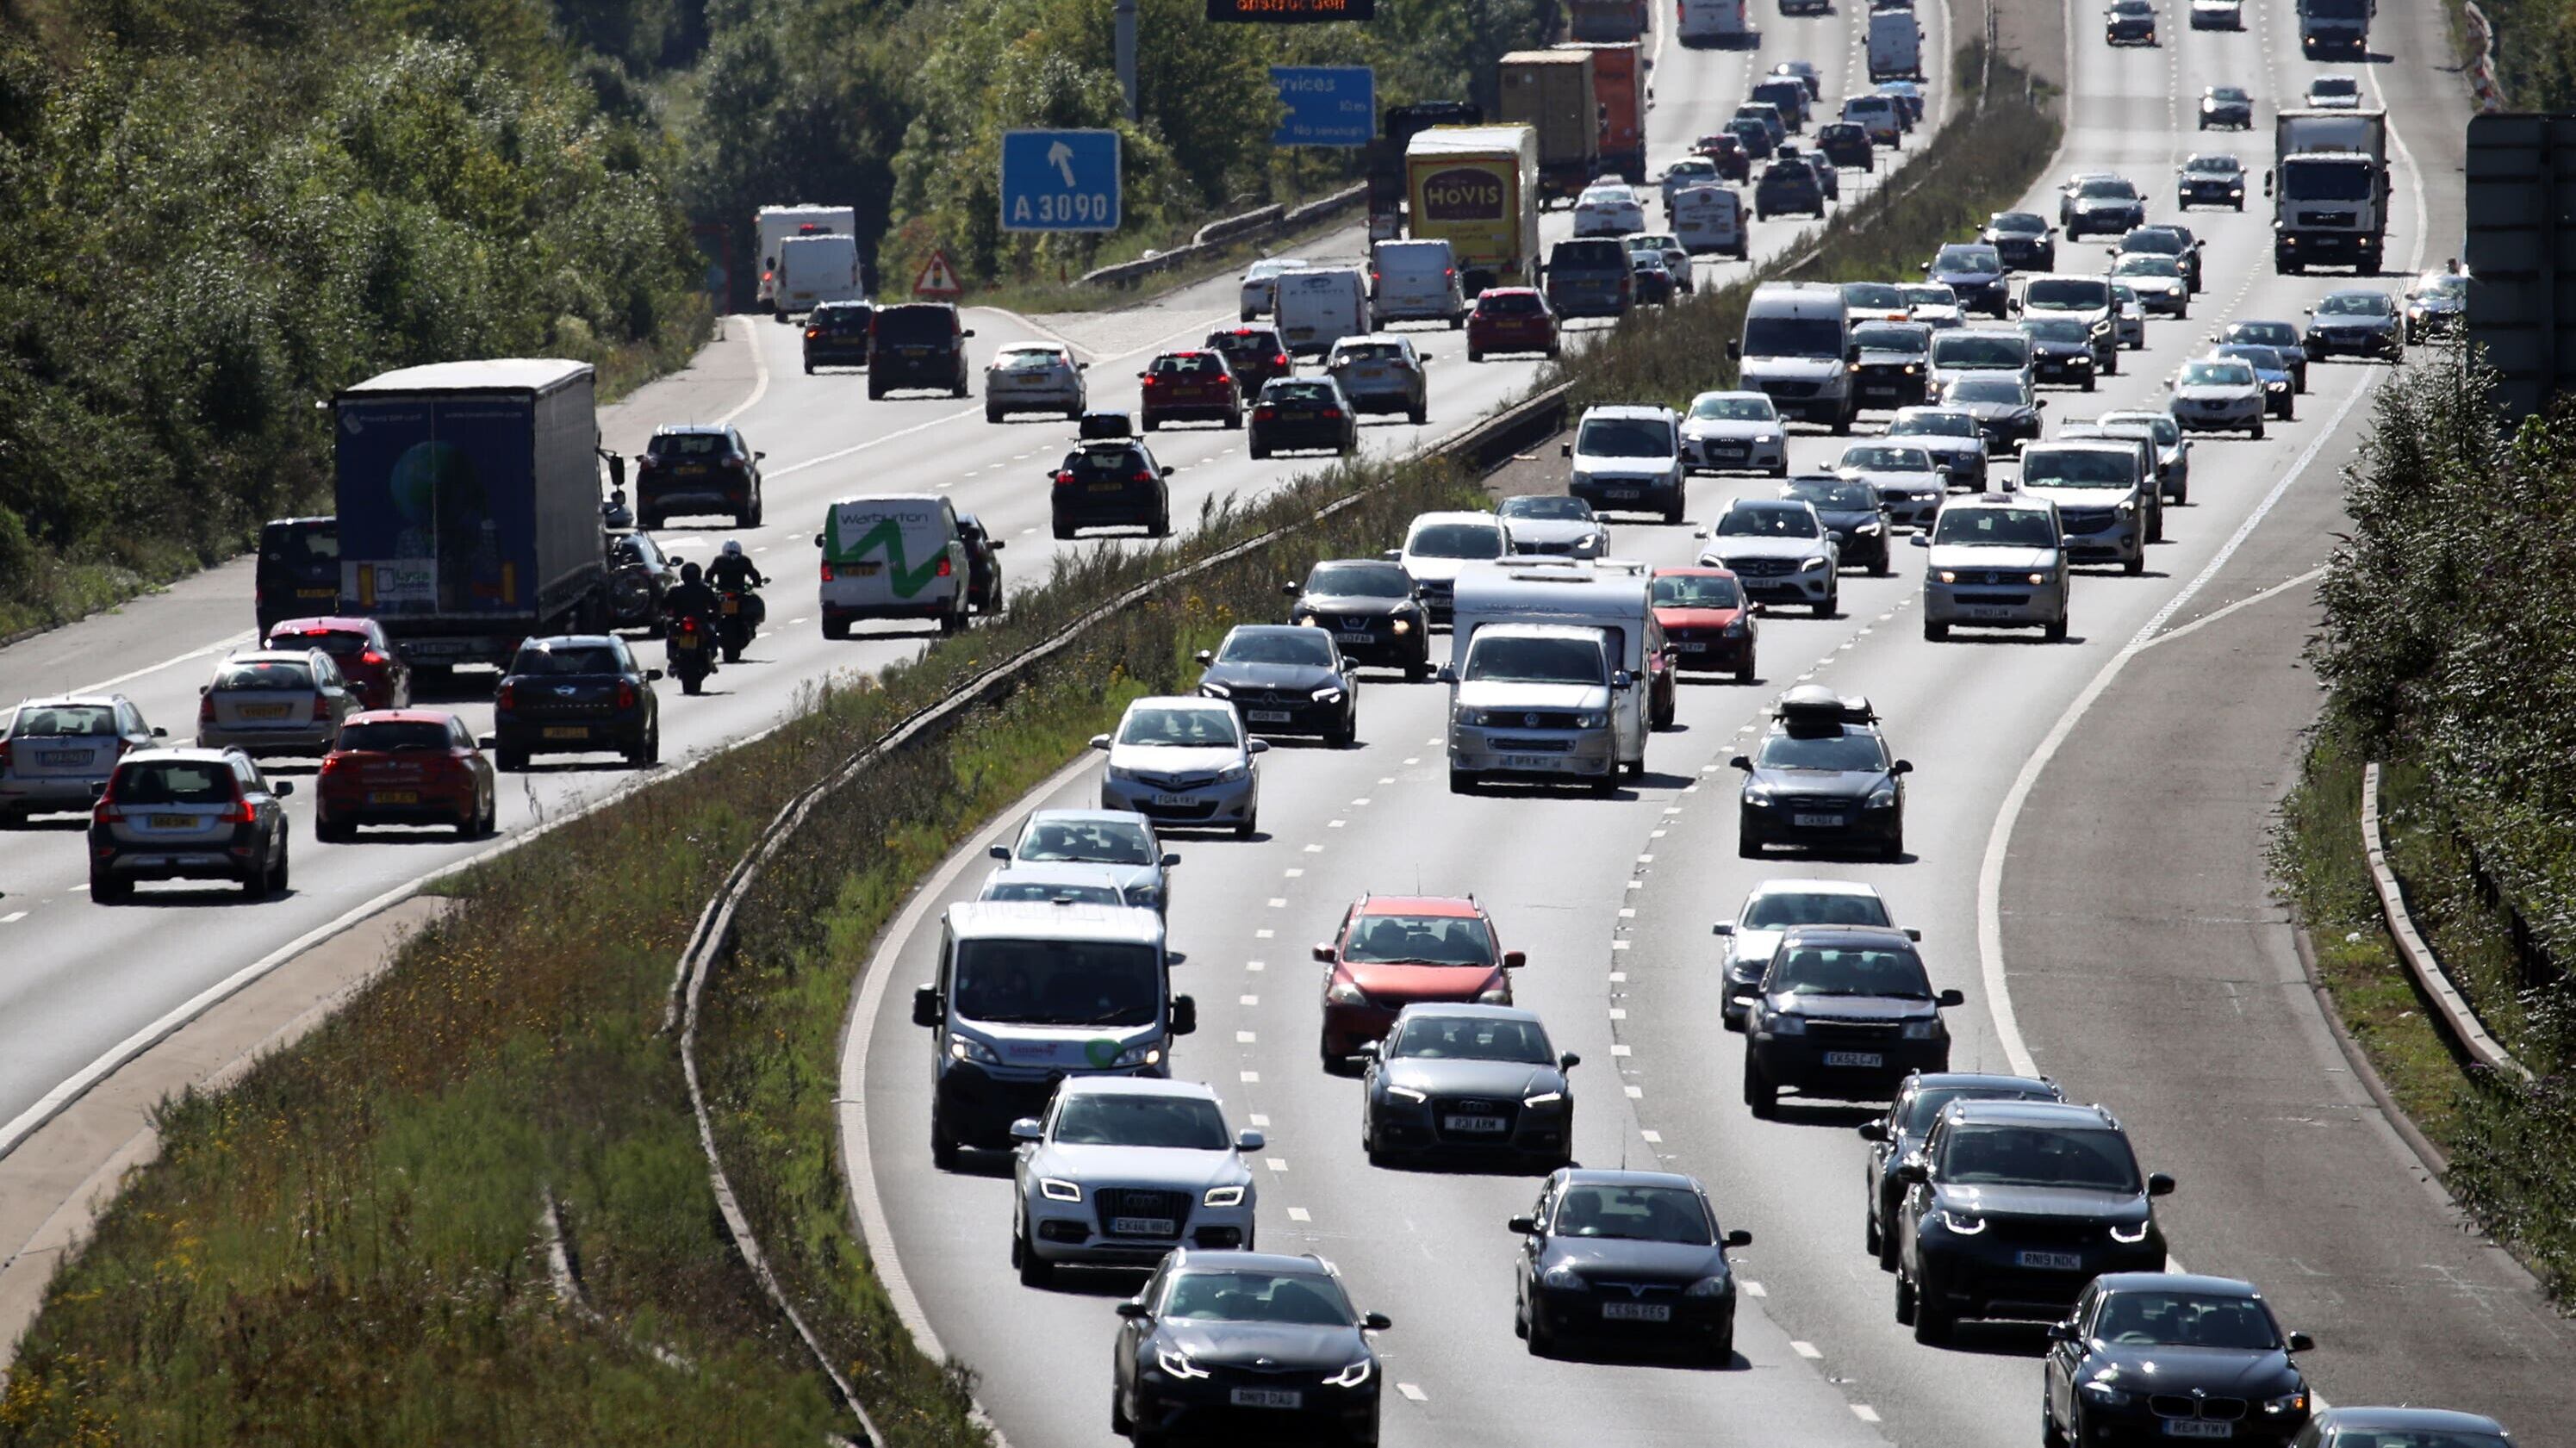 Drivers are being warned over severe road congestion this weekend as nearly 13 million leisure trips are expected to take place across the UK (Andrew Matthews/PA)